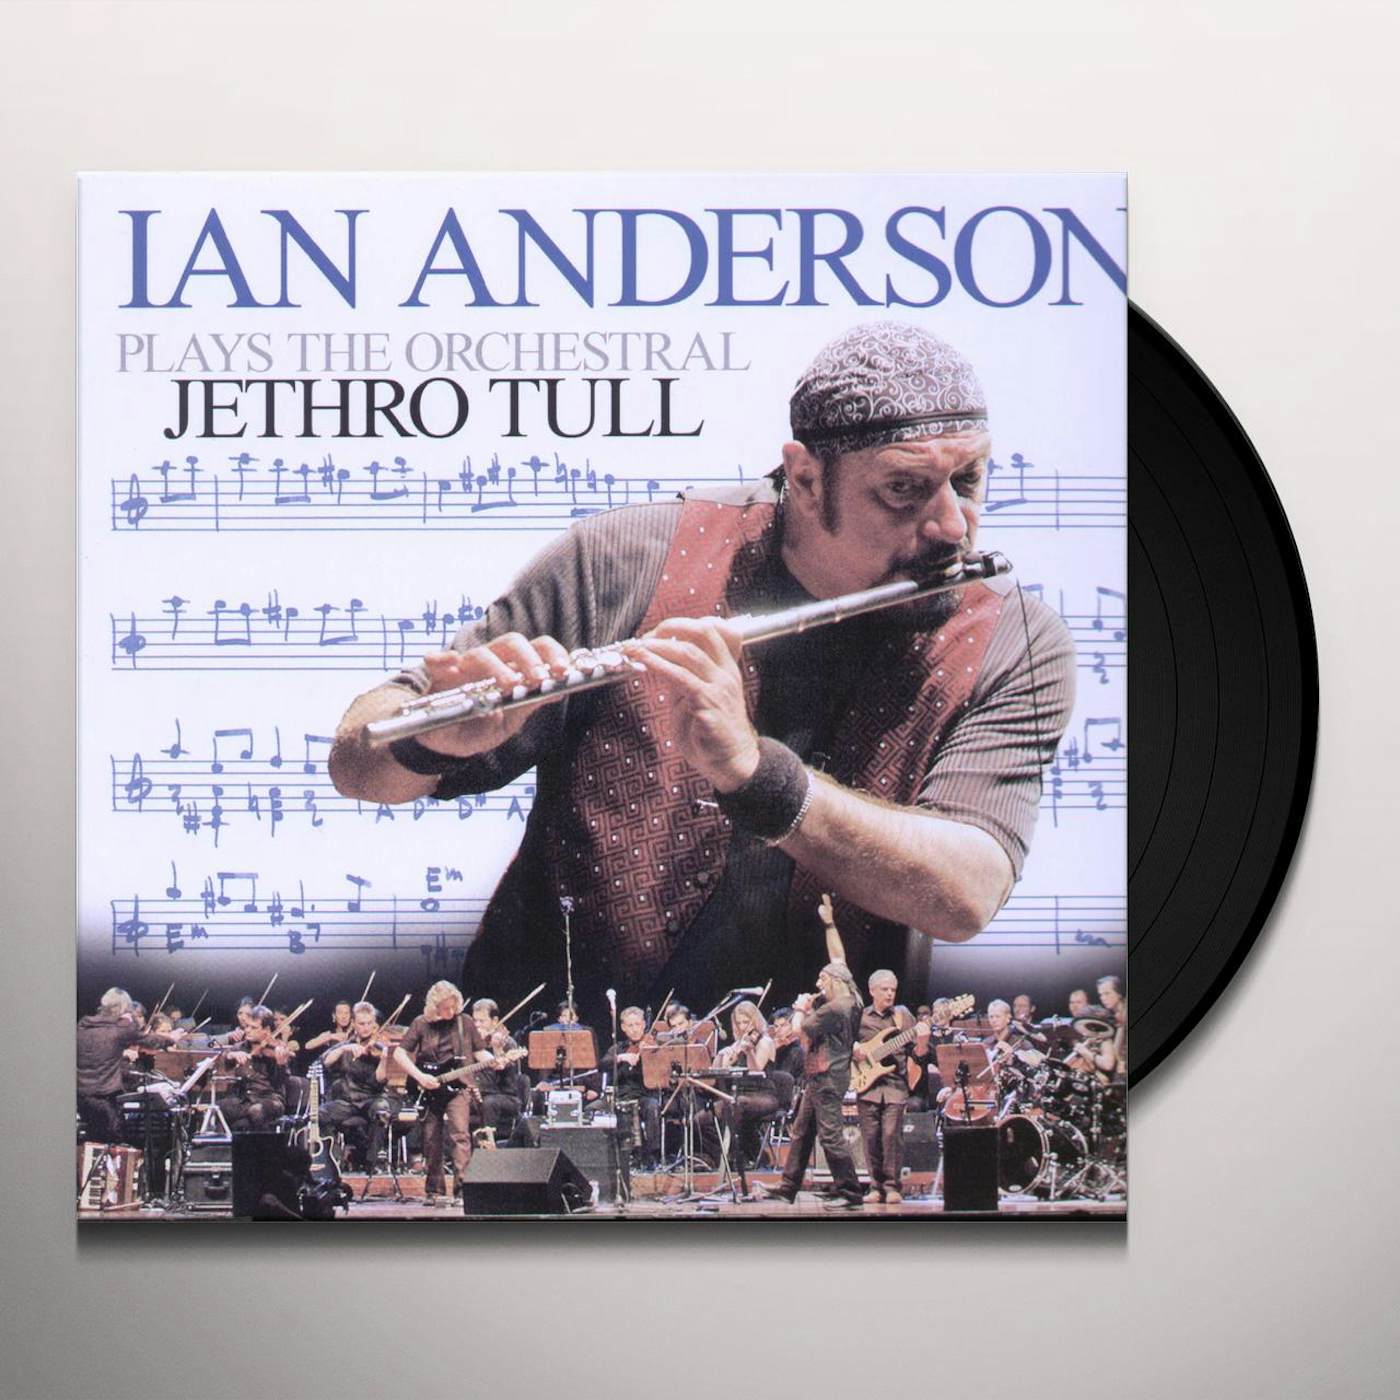 IAN ANDERSON PLAYS THE ORCHESTRAL JETHRO TULL Vinyl Record